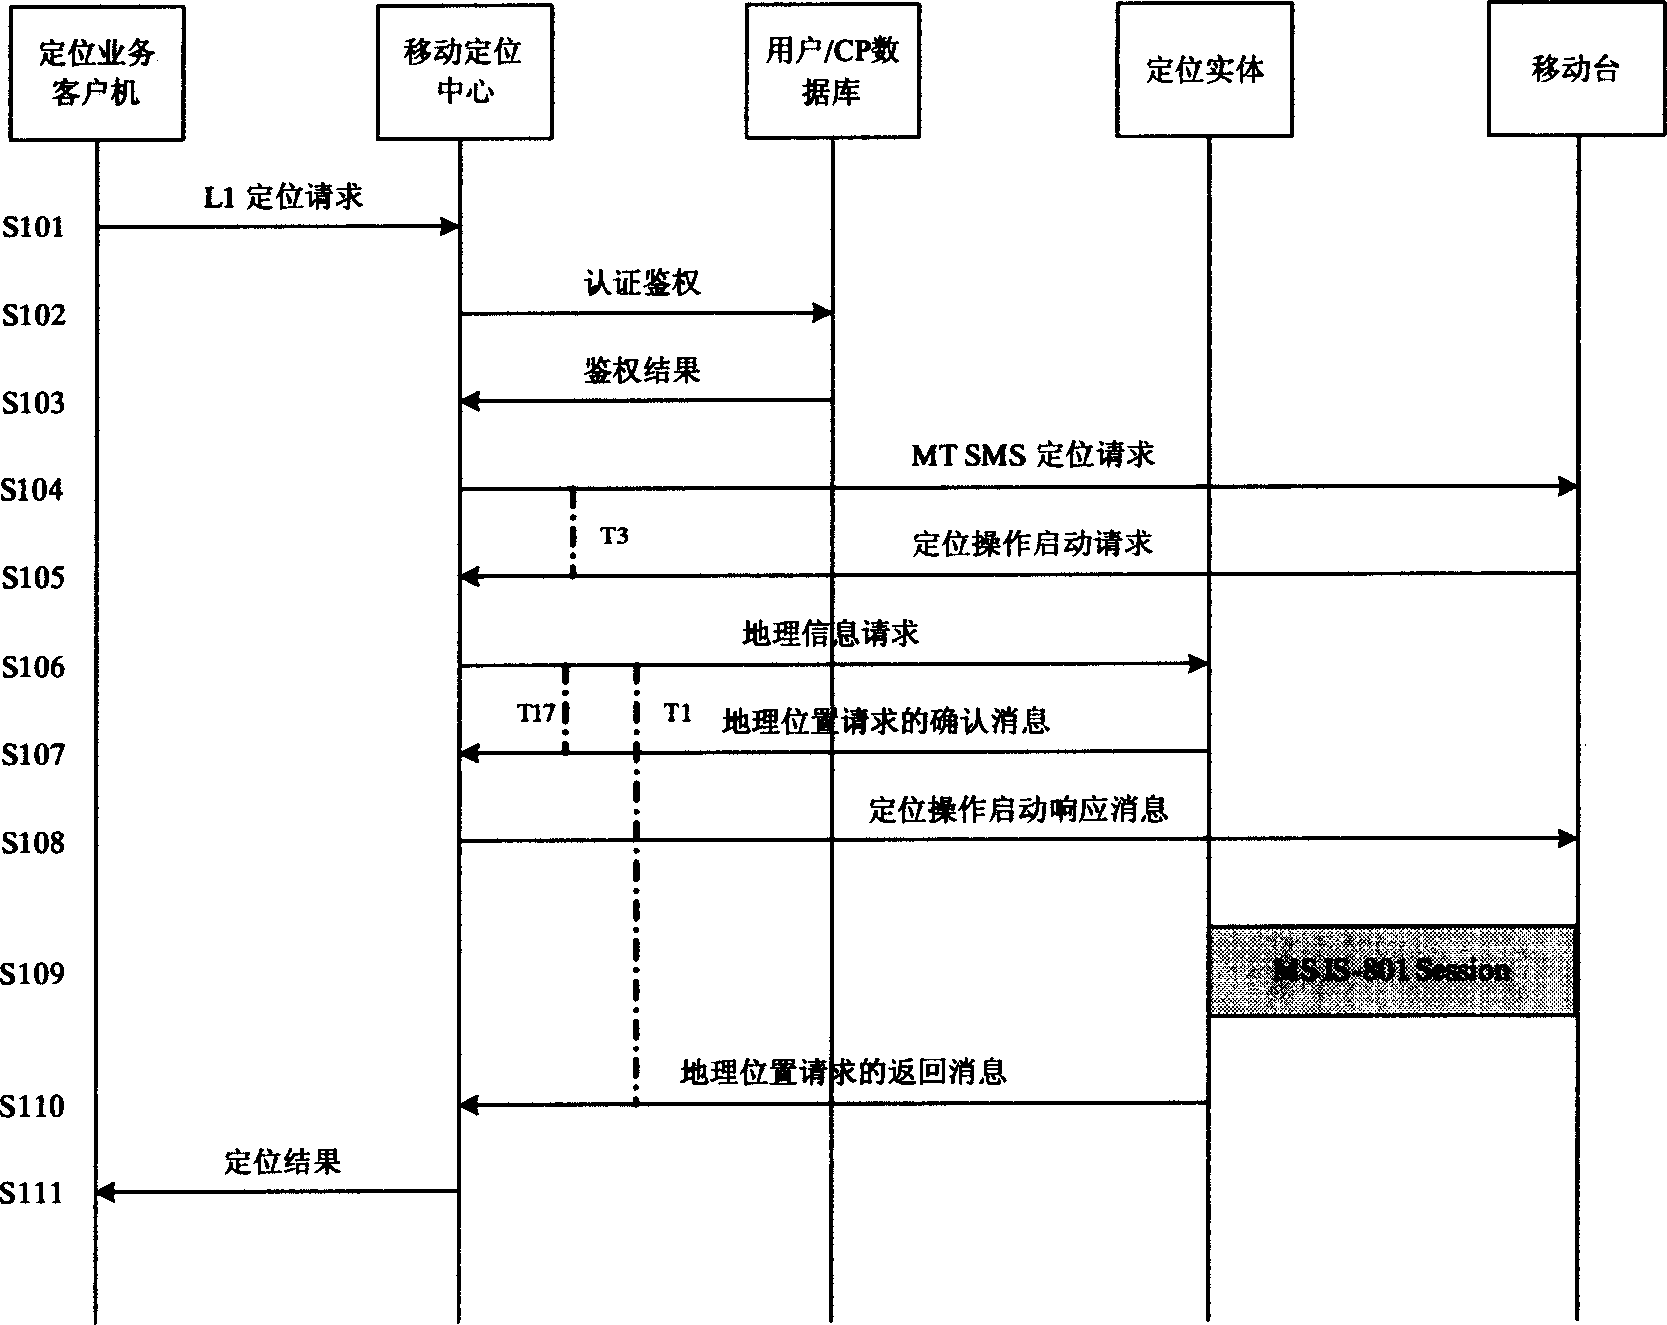 Method for implementing mobile positioning service